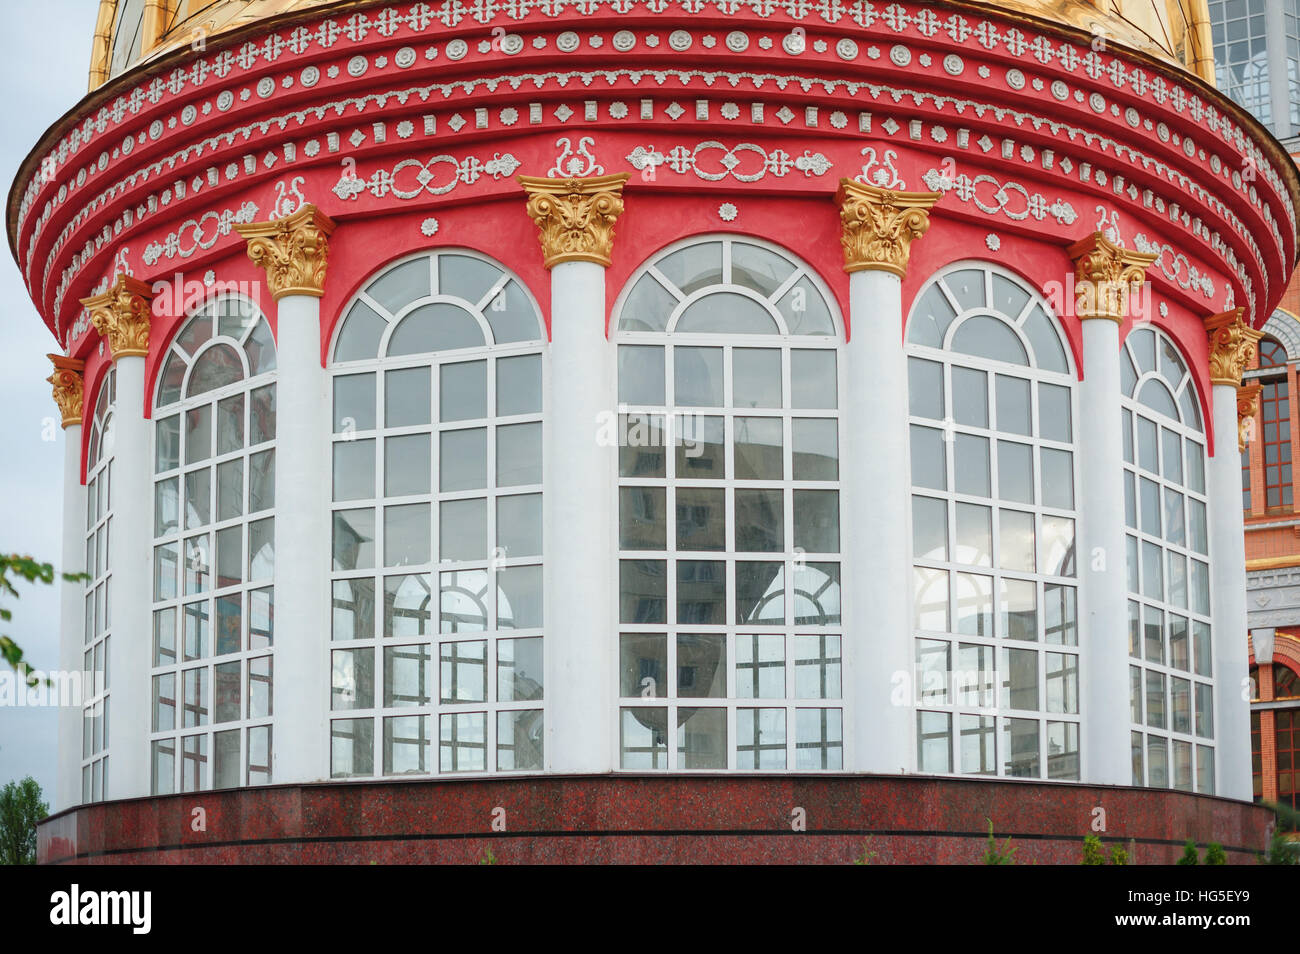 Red round building with large Windows and columns Stock Photo